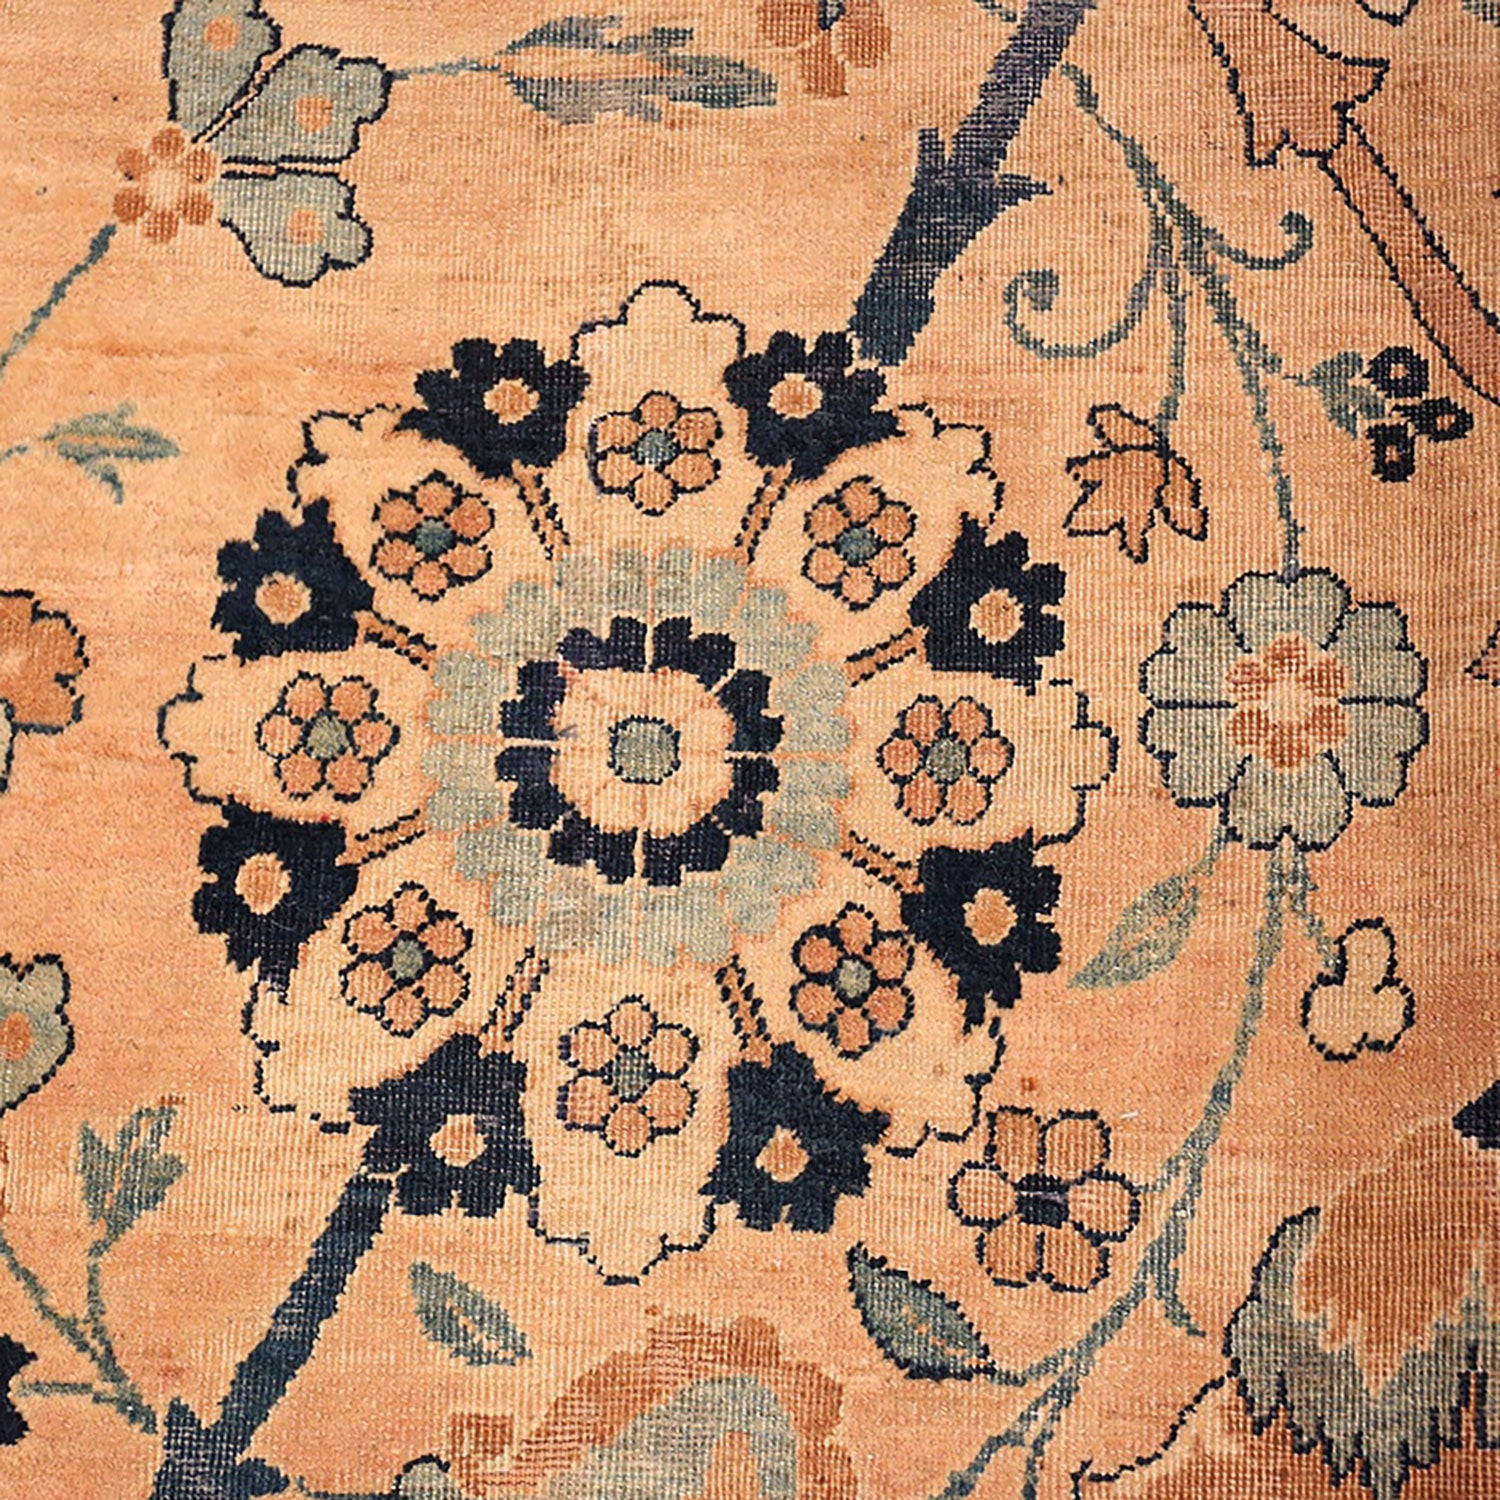 Close-up of a detailed floral-patterned carpet in classic Oriental style